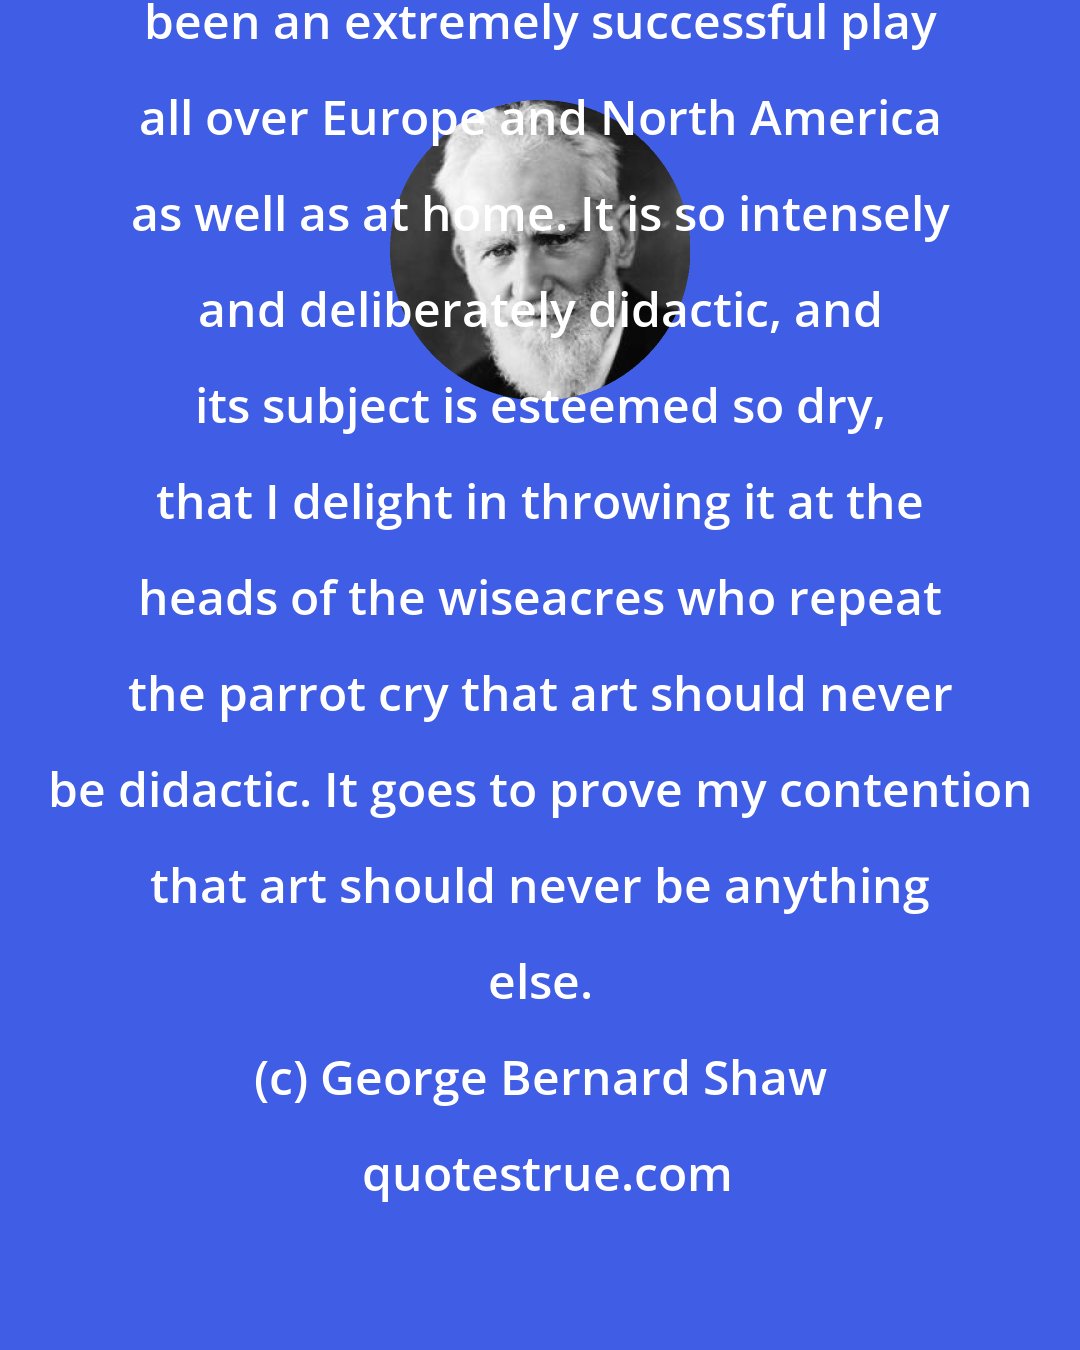 George Bernard Shaw: I wish to boast that Pygmalion has been an extremely successful play all over Europe and North America as well as at home. It is so intensely and deliberately didactic, and its subject is esteemed so dry, that I delight in throwing it at the heads of the wiseacres who repeat the parrot cry that art should never be didactic. It goes to prove my contention that art should never be anything else.